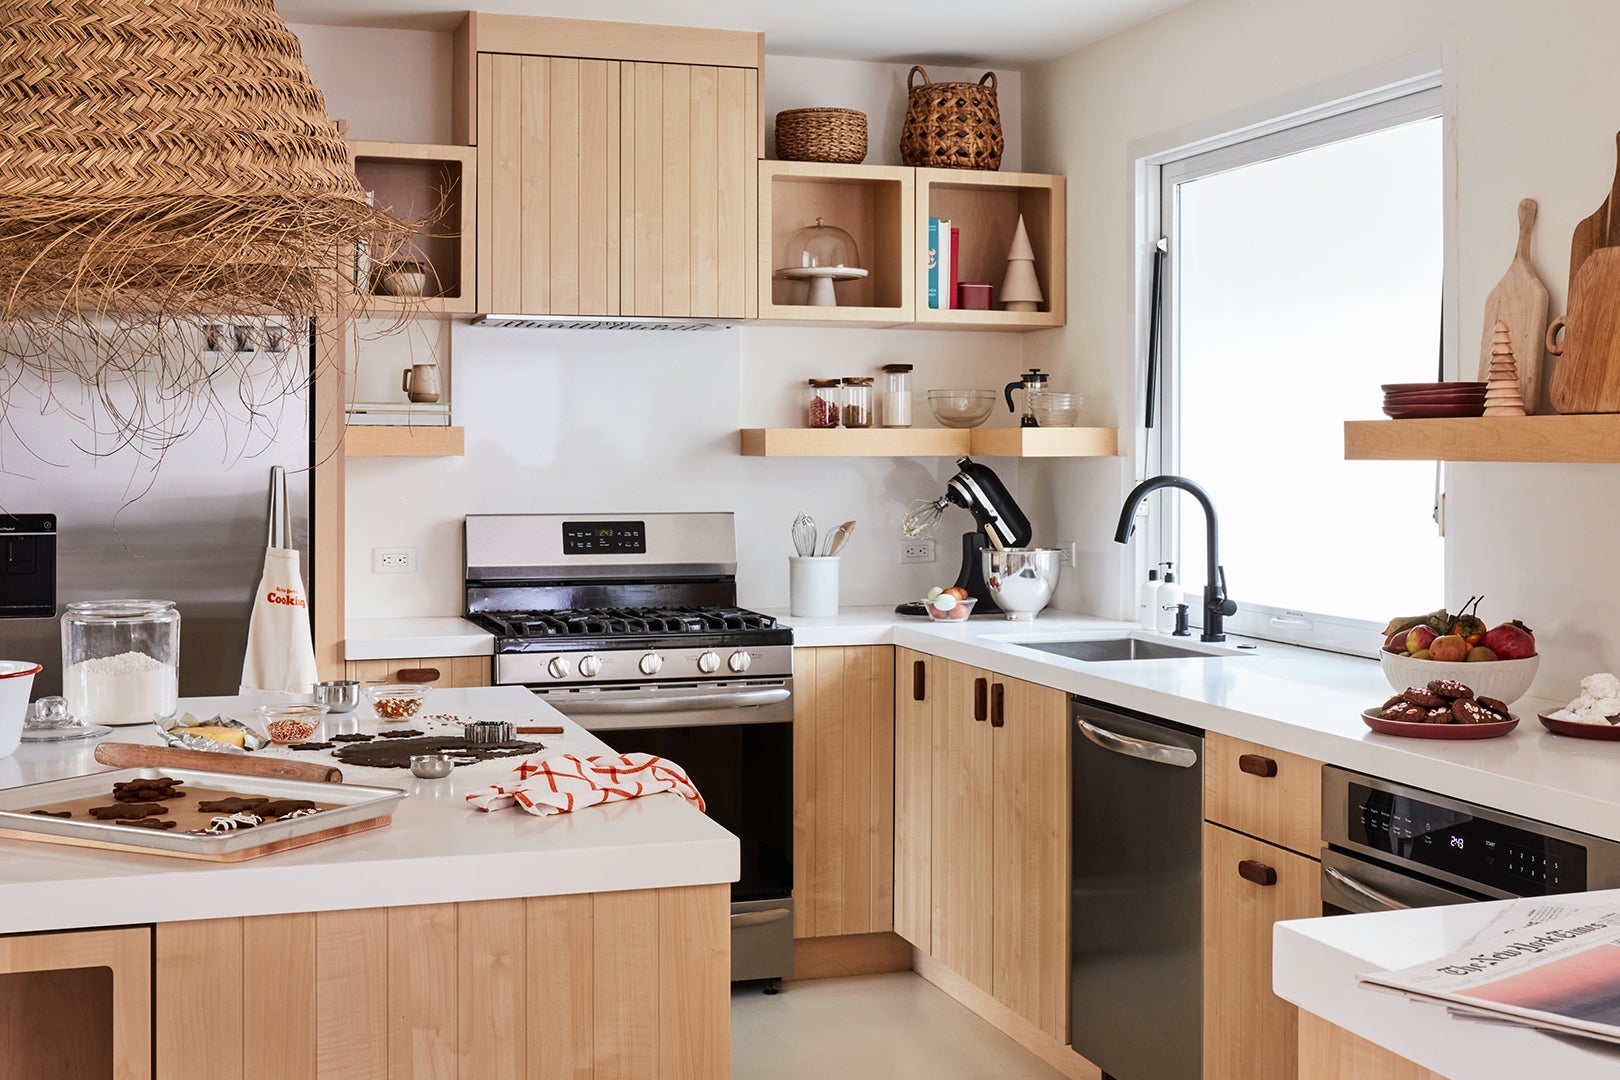 The Epic Kitchens in These Vacay Rentals Are Vetted by Cooking Pros